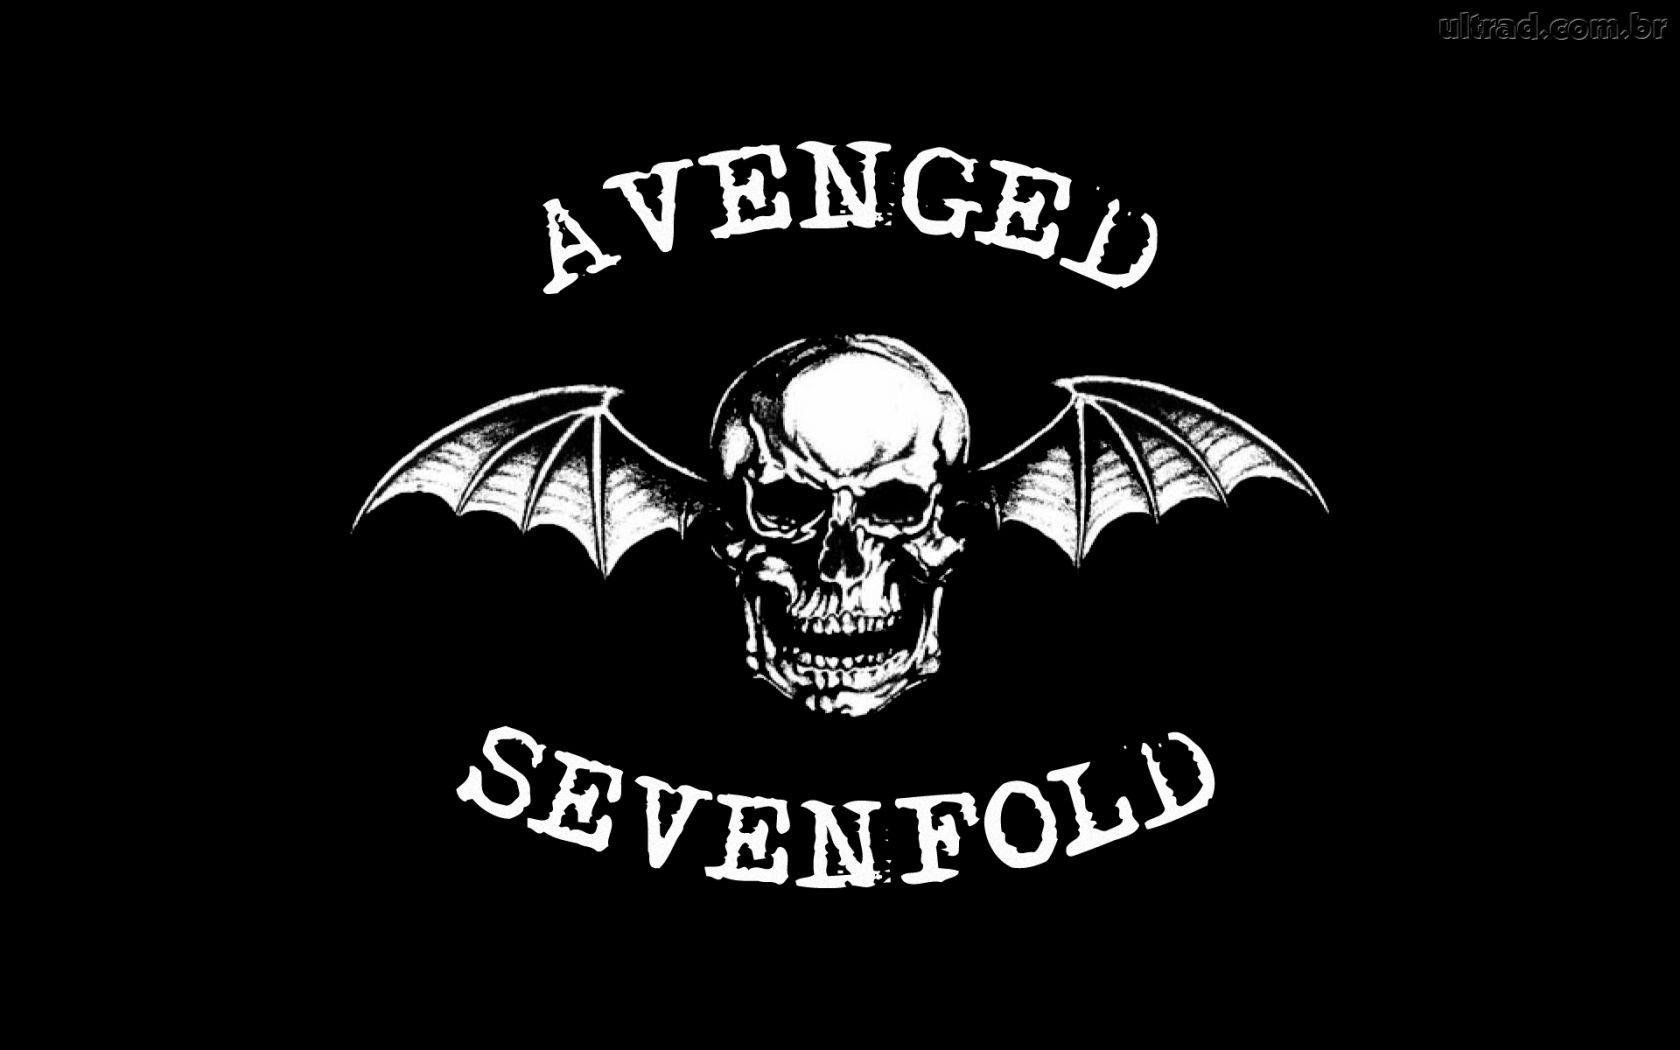 Avenged Sevenfold 4088 Wallpapers – 1680×1050 High Definition